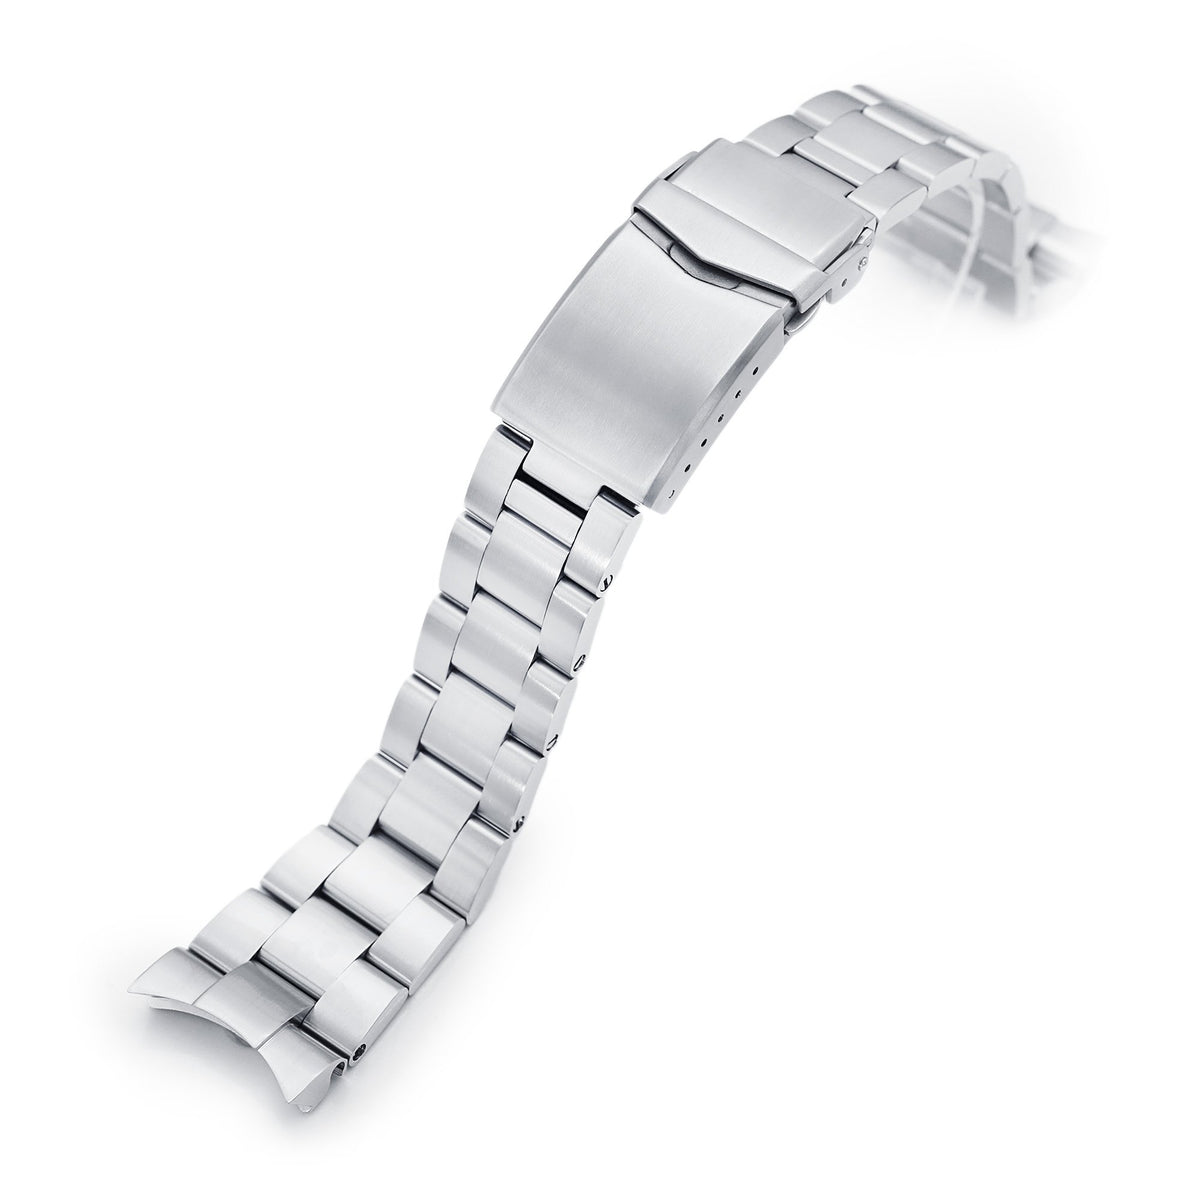 22mm Super-O Boyer 316L Stainless Steel Watch Bracelet for Orient Kamasu Brushed V-Clasp Strapcode Watch Bands